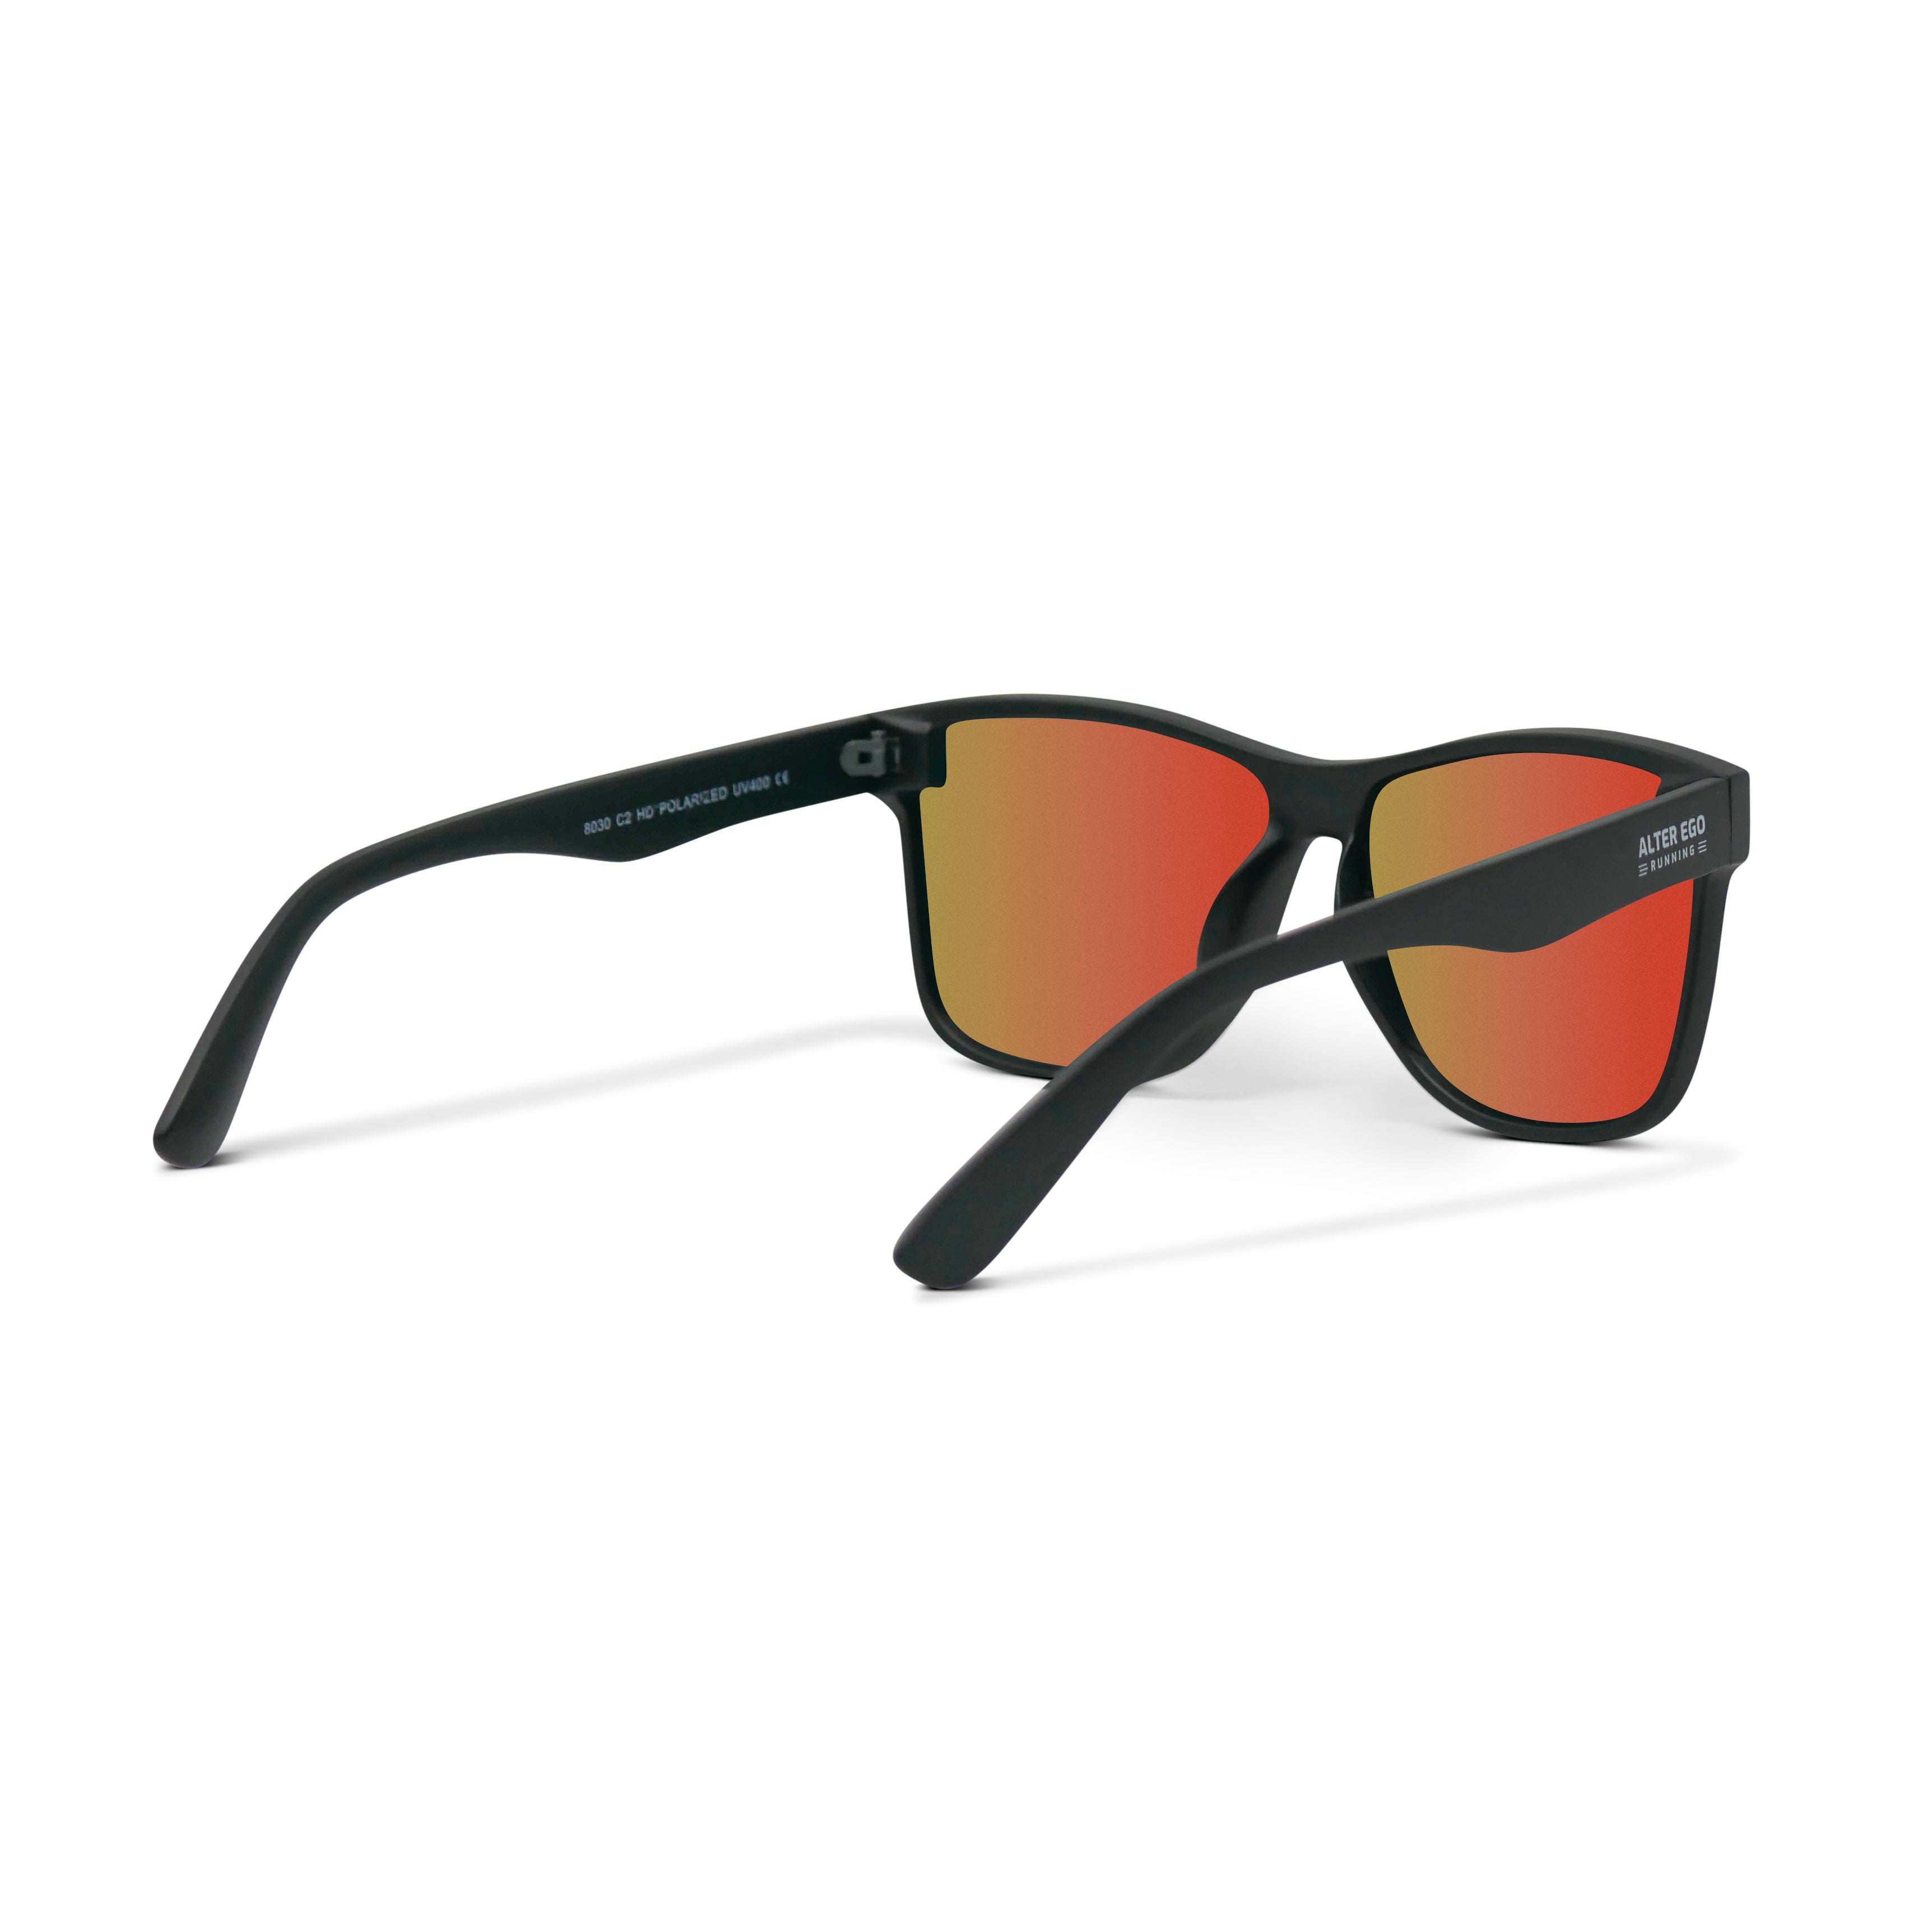 INFINITY - BLACK FRAME | MULTI COLORED PURLE/RED POLARIZED LENS